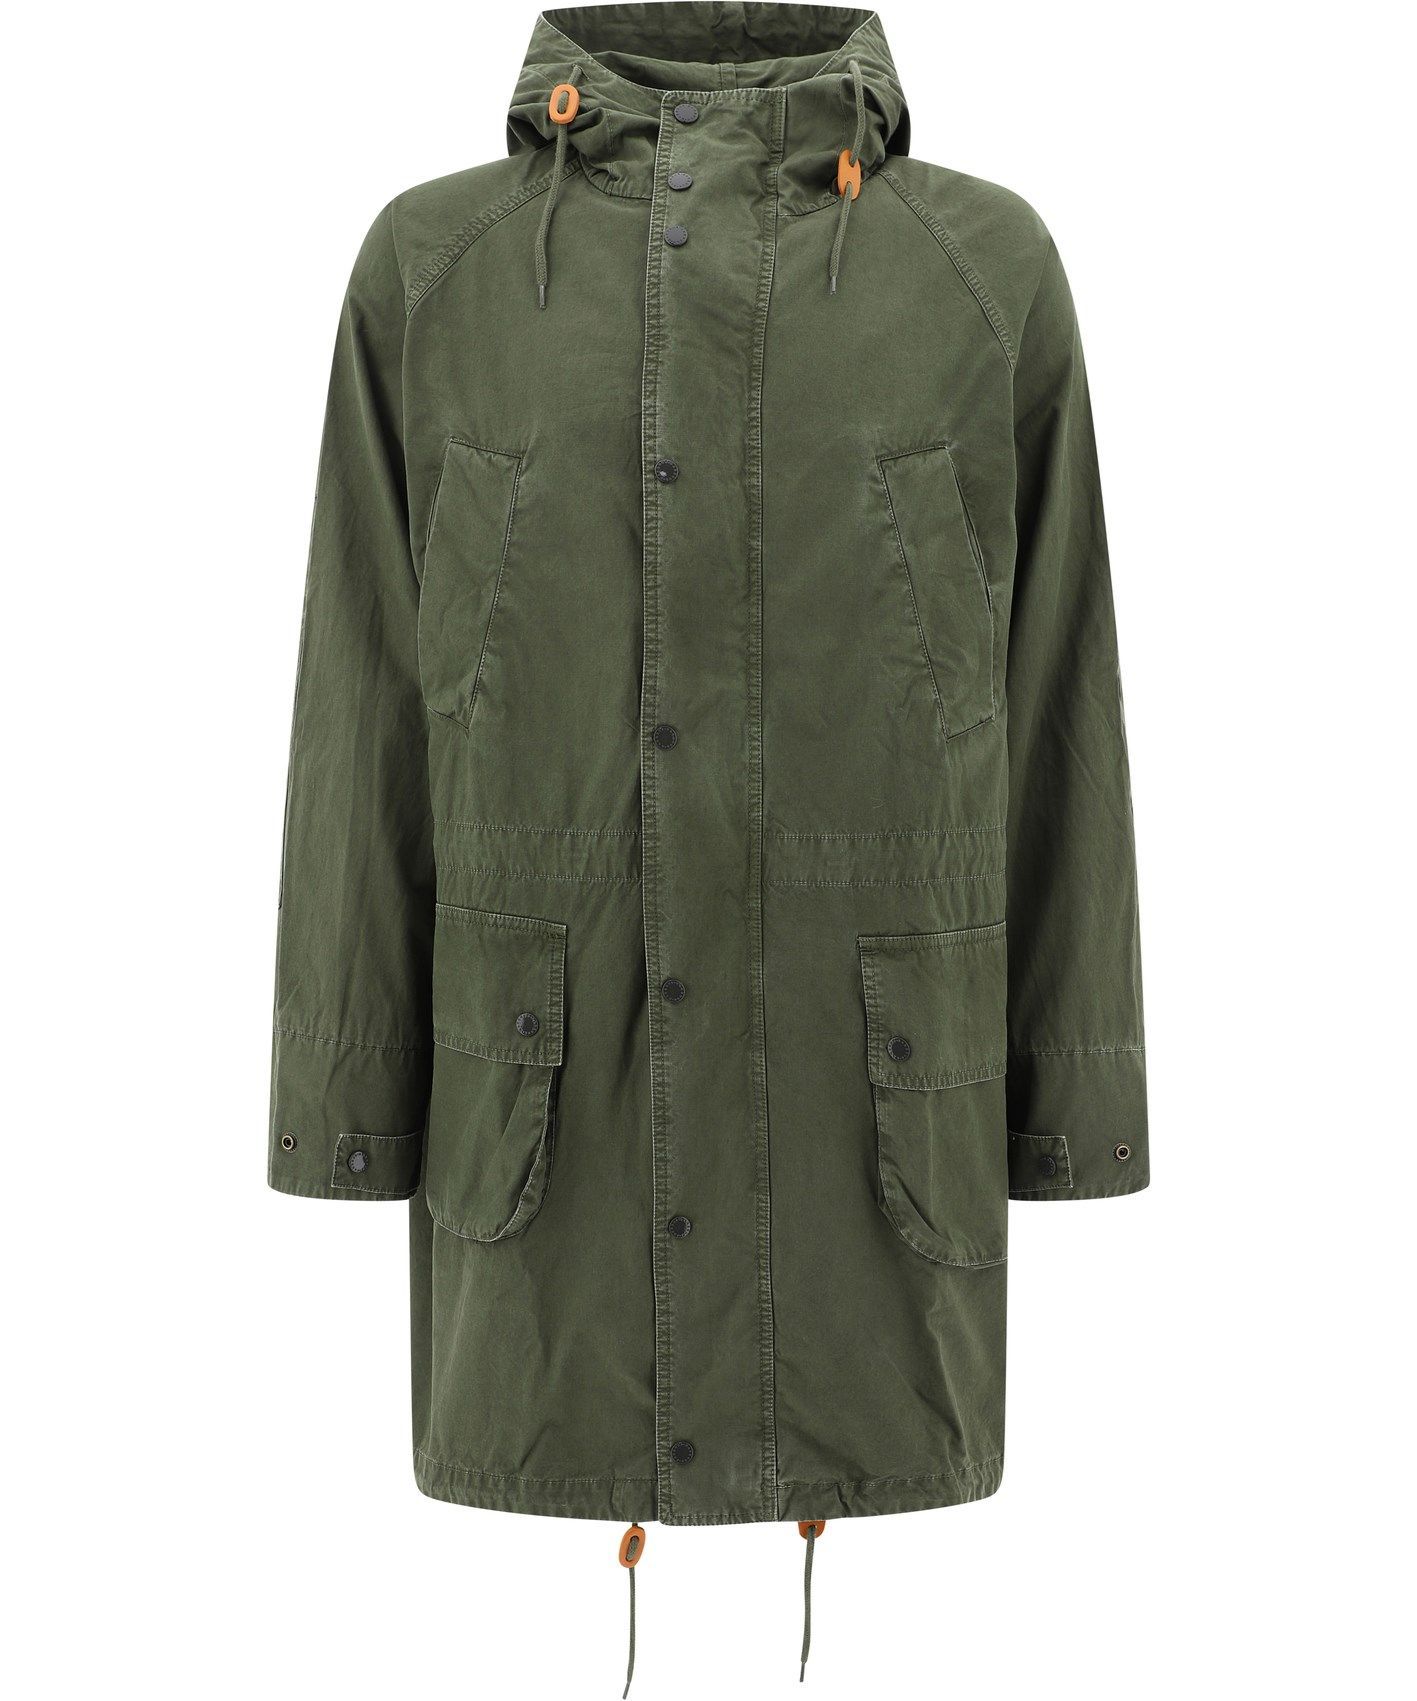 COAT BARBOUR, COTTON 100%, color GREEN, SS20, product code BACPS21570L52